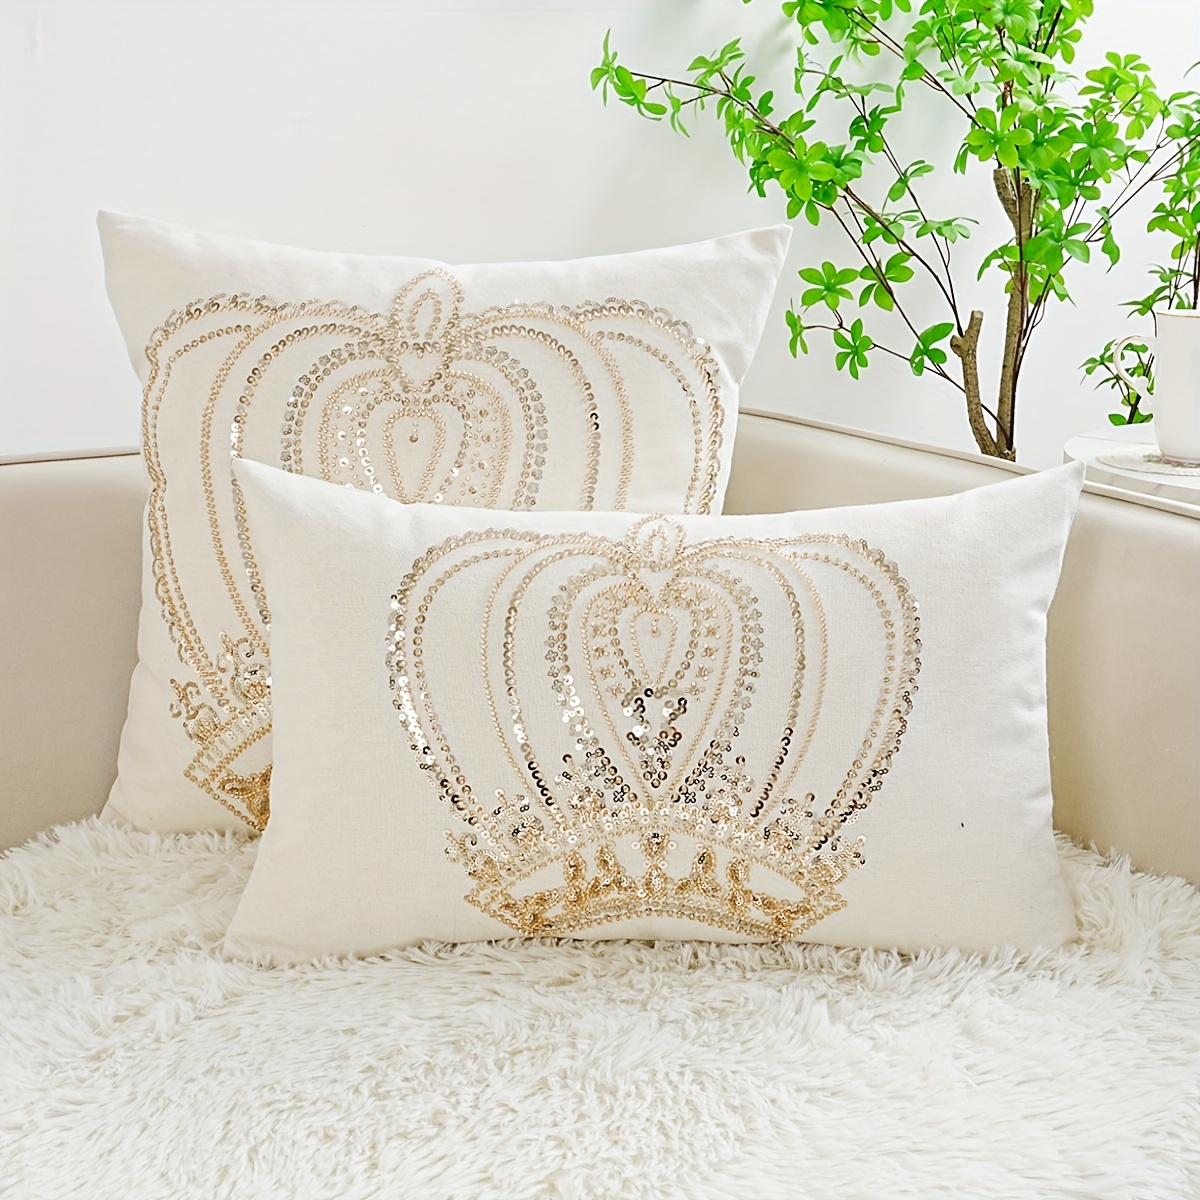 

Charming Sequin Crown Embroidered Pillow Cover - Machine Washable, Zip Closure, Versatile Room Accent For Home & Living Spaces